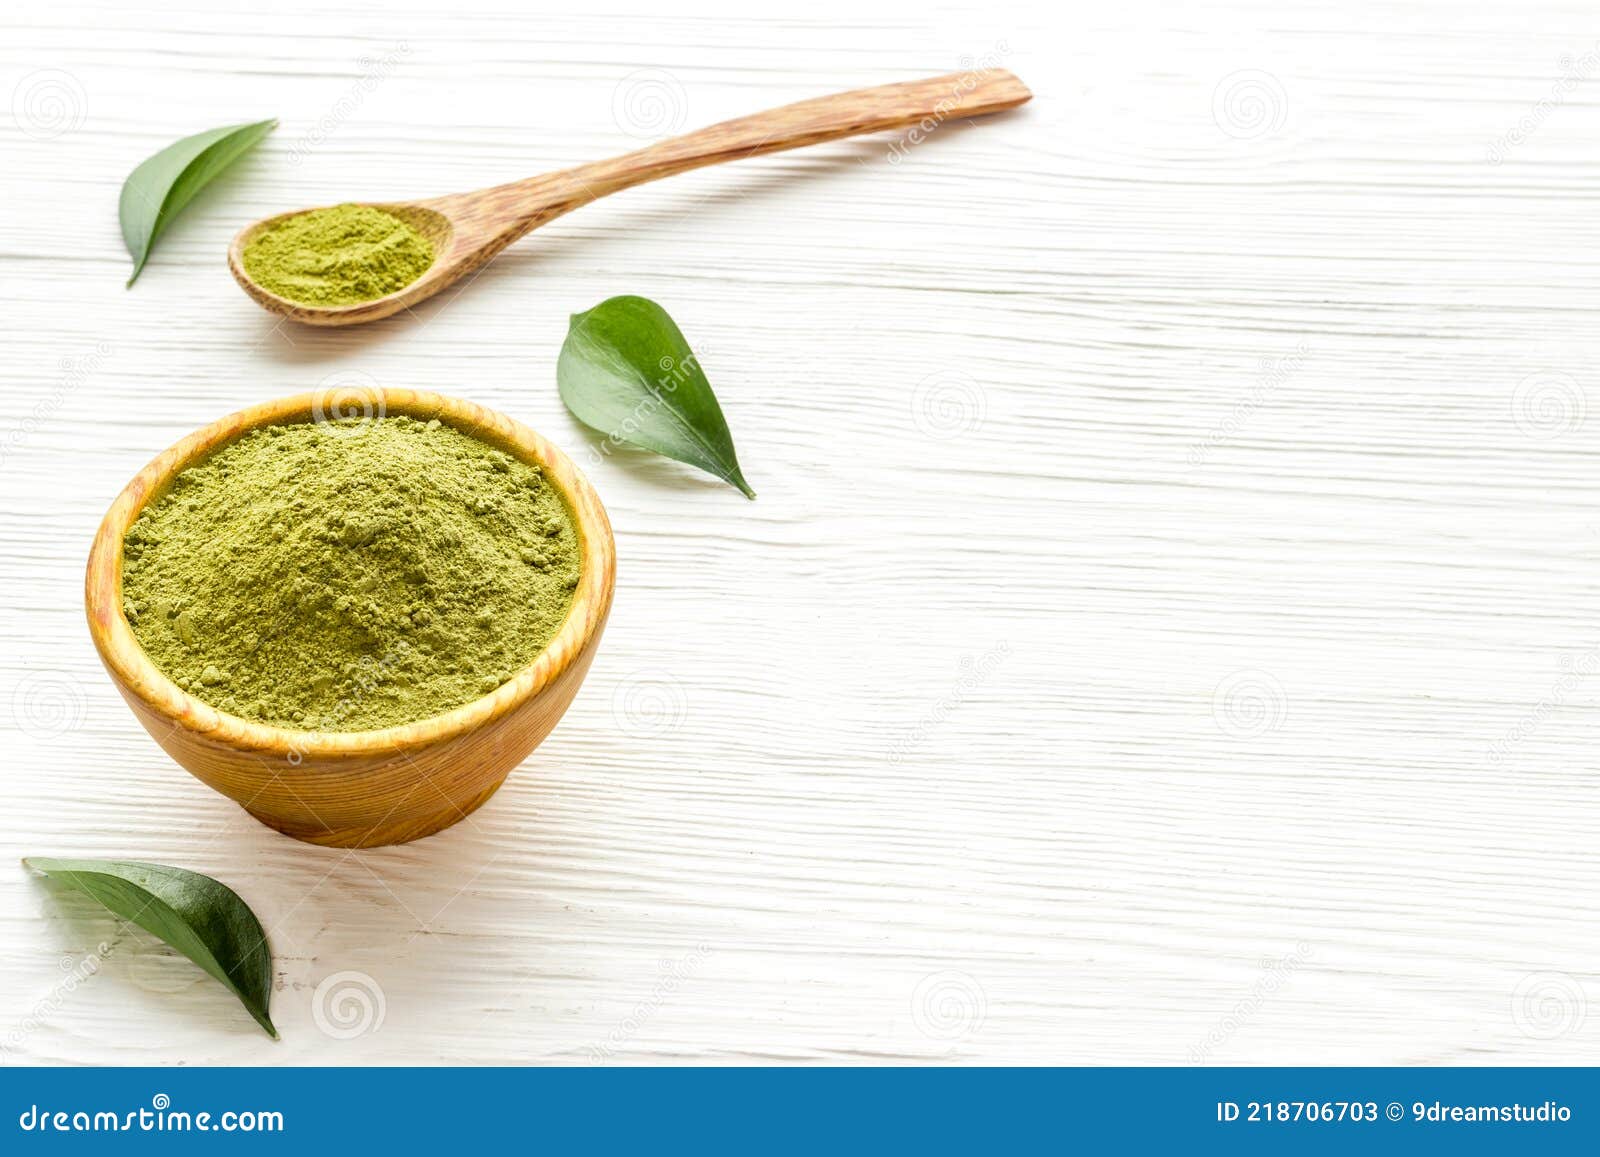 Henna Powder in Wooden Bowl with Green Leaves. Herbal Natural Hair Dye  Stock Image - Image of green, medicinal: 218706703